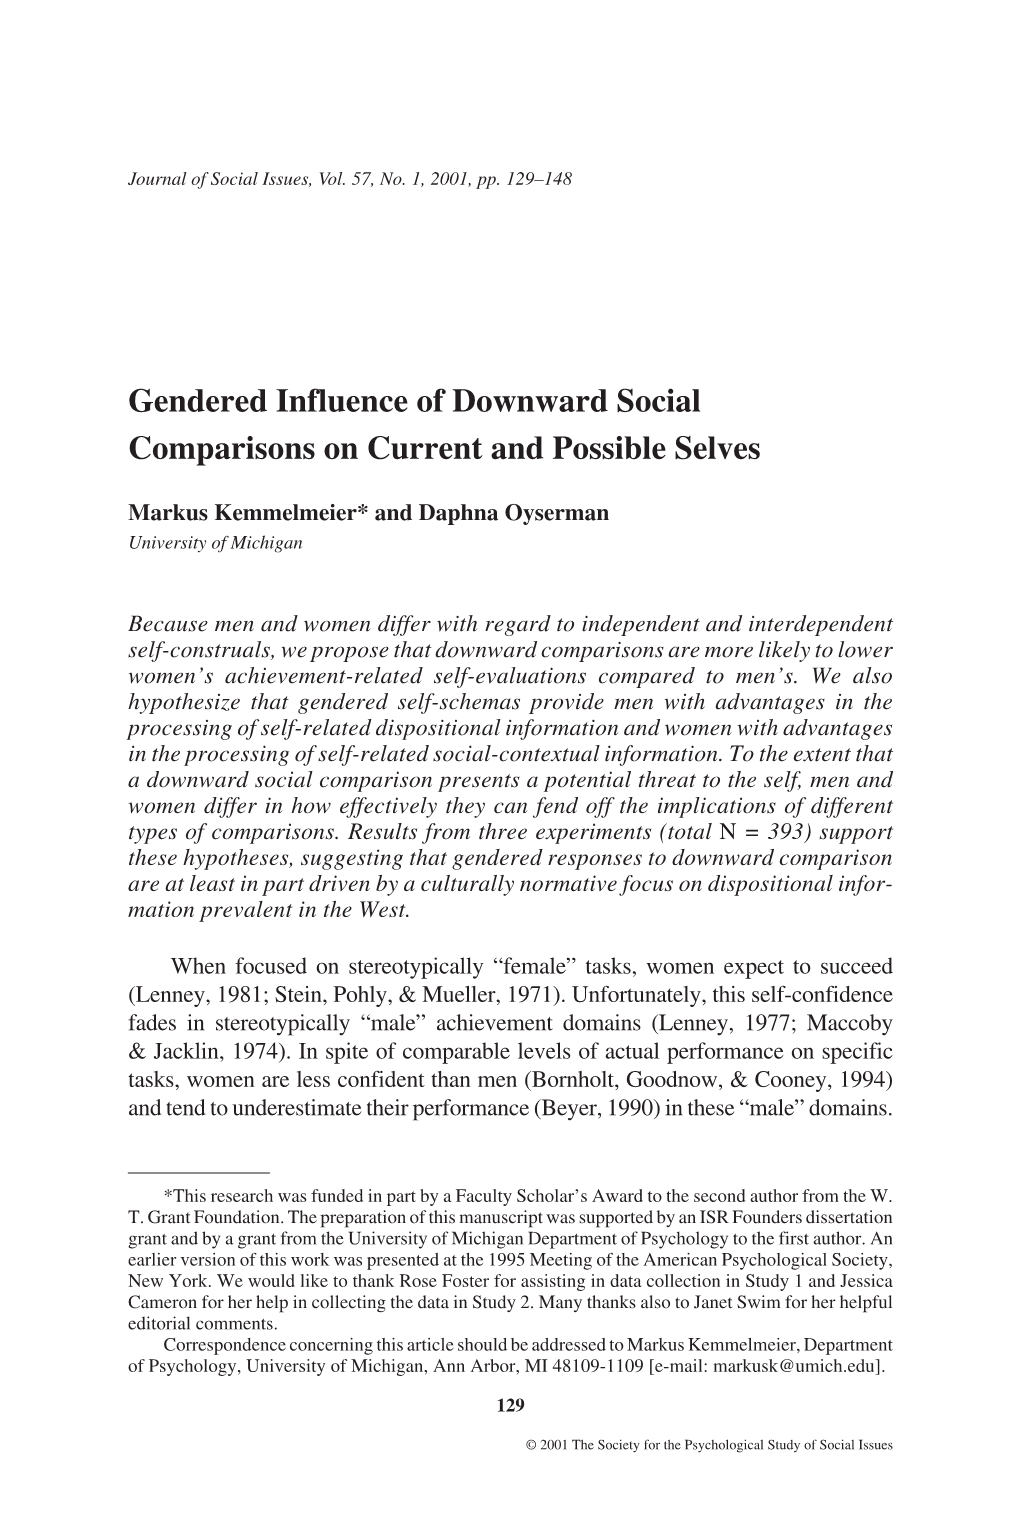 Gendered Influence of Downward Social Comparisons on Current and Possible Selves